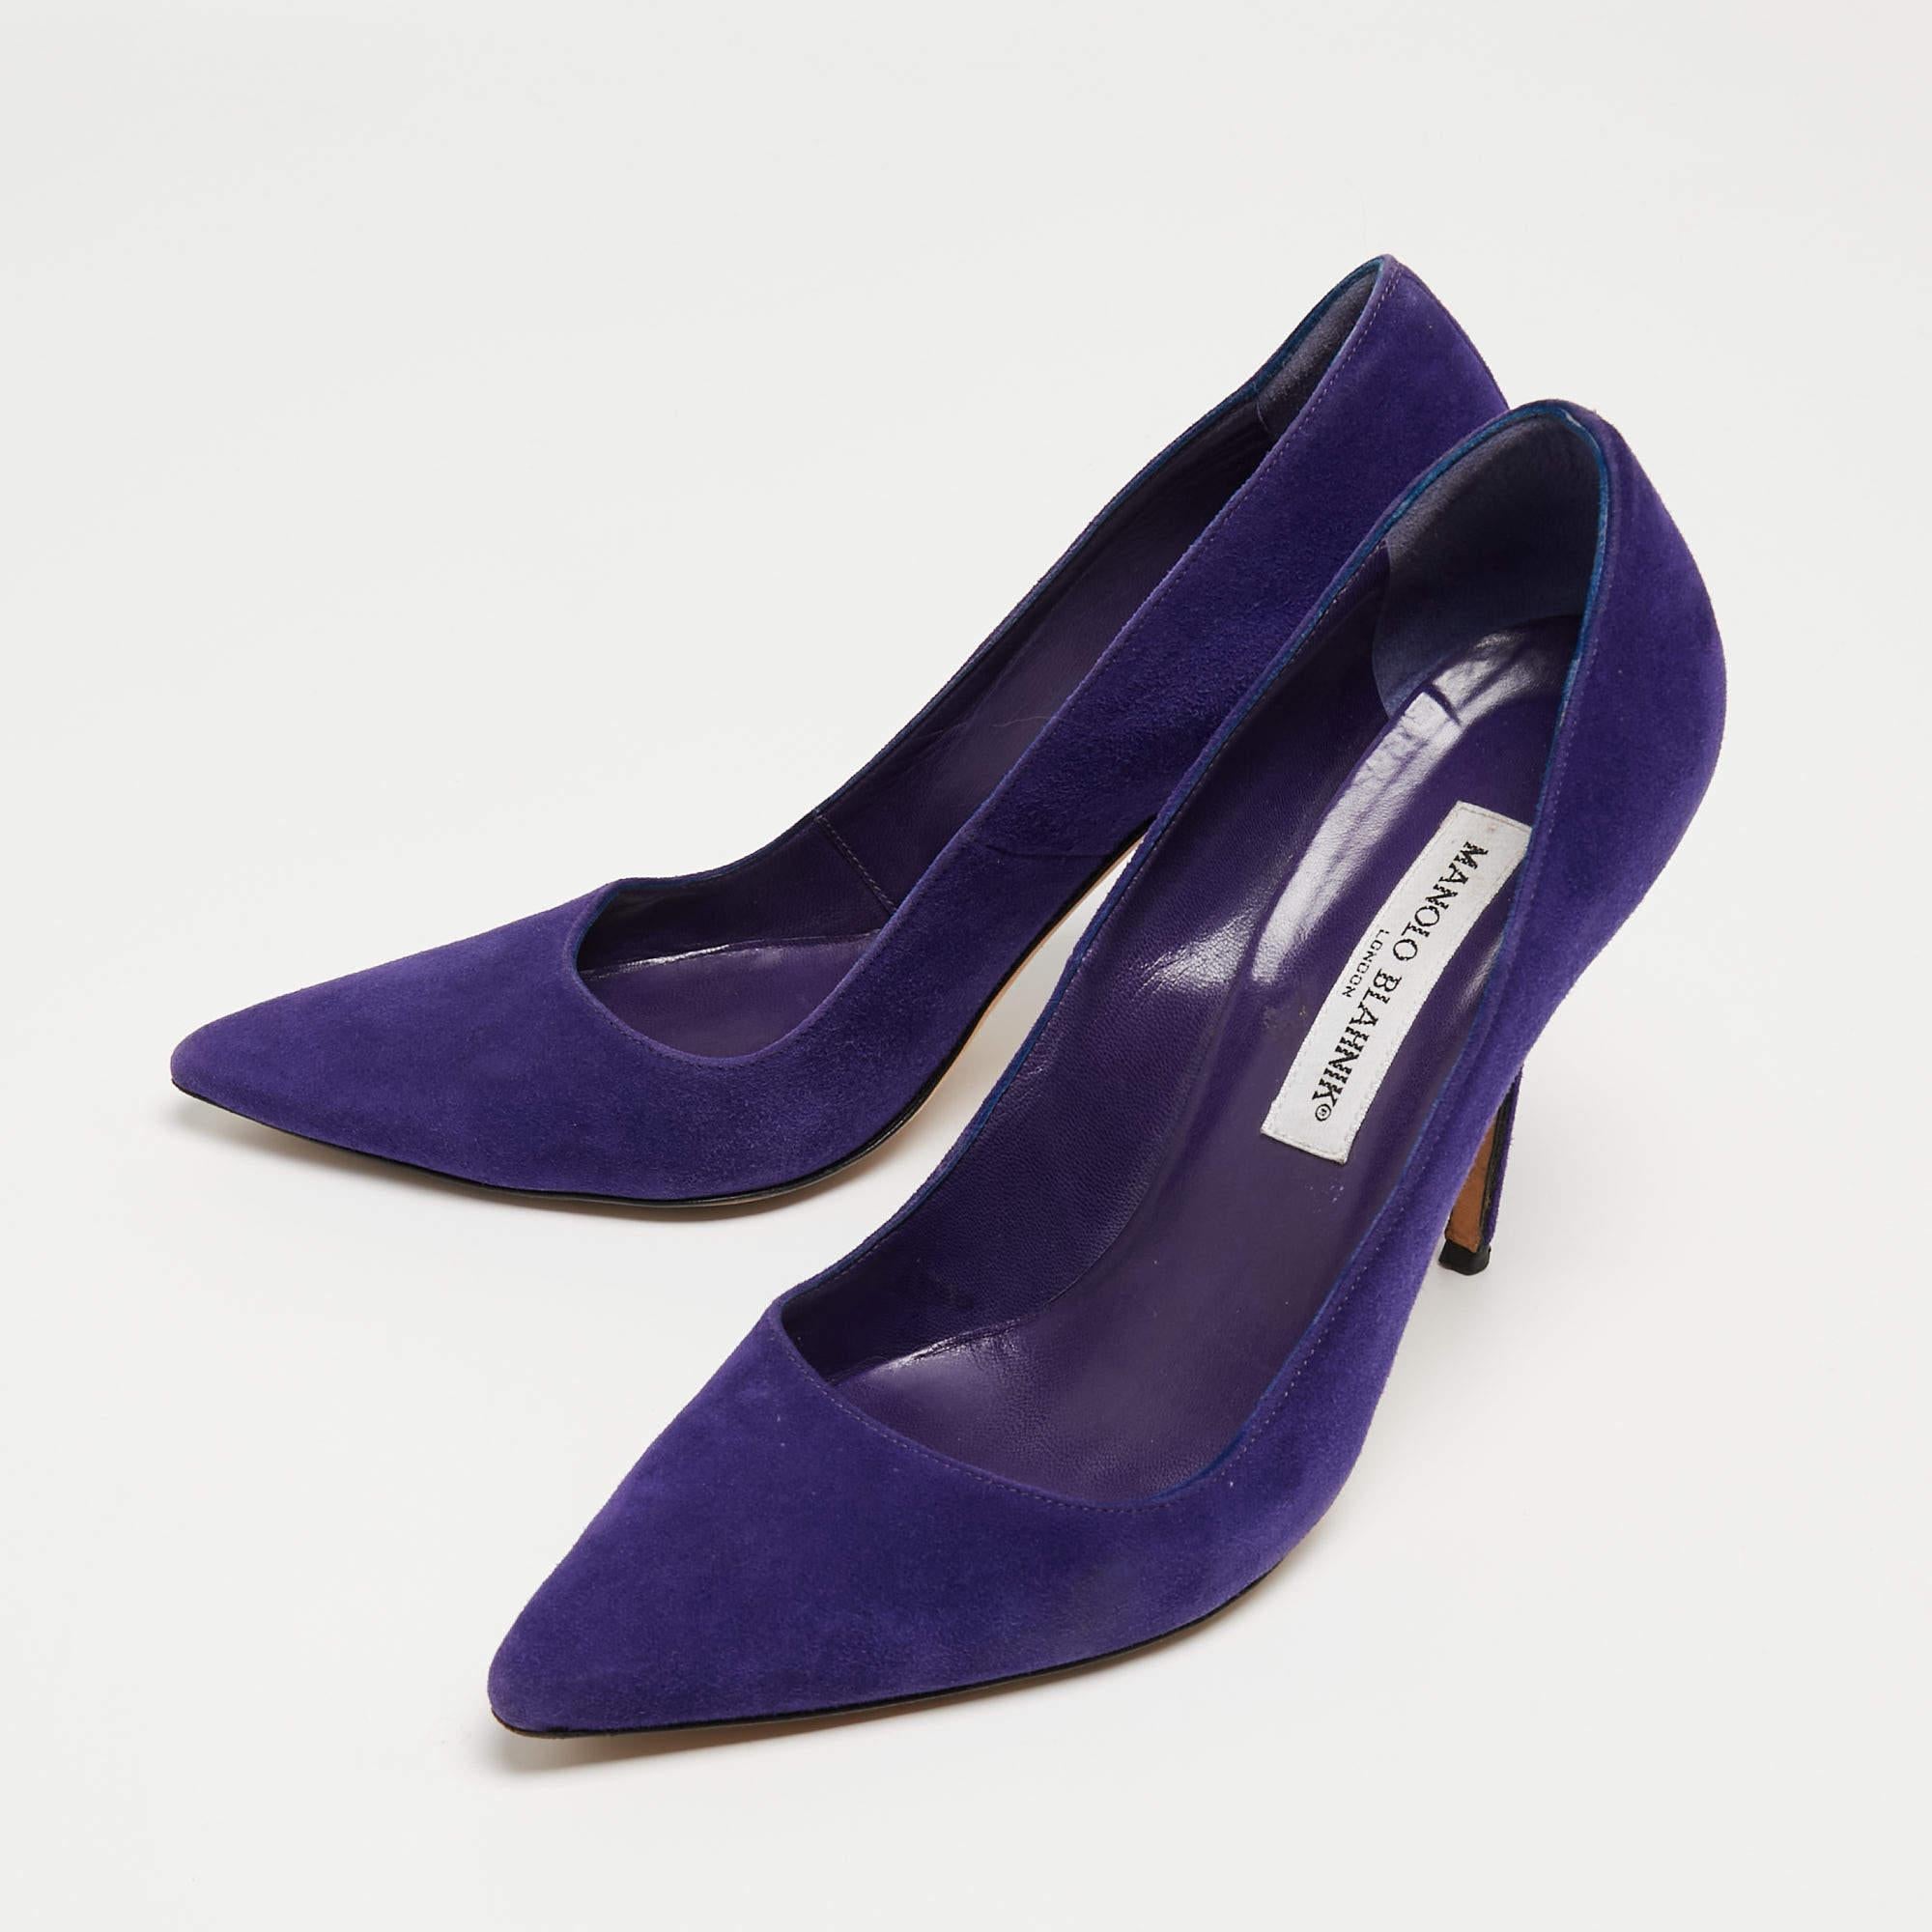 Complement your well-put-together outfit with these suede pumps by Manolo Blahnik. Minimal and classy, they have an amazing construction for enduring quality and comfortable fit.

